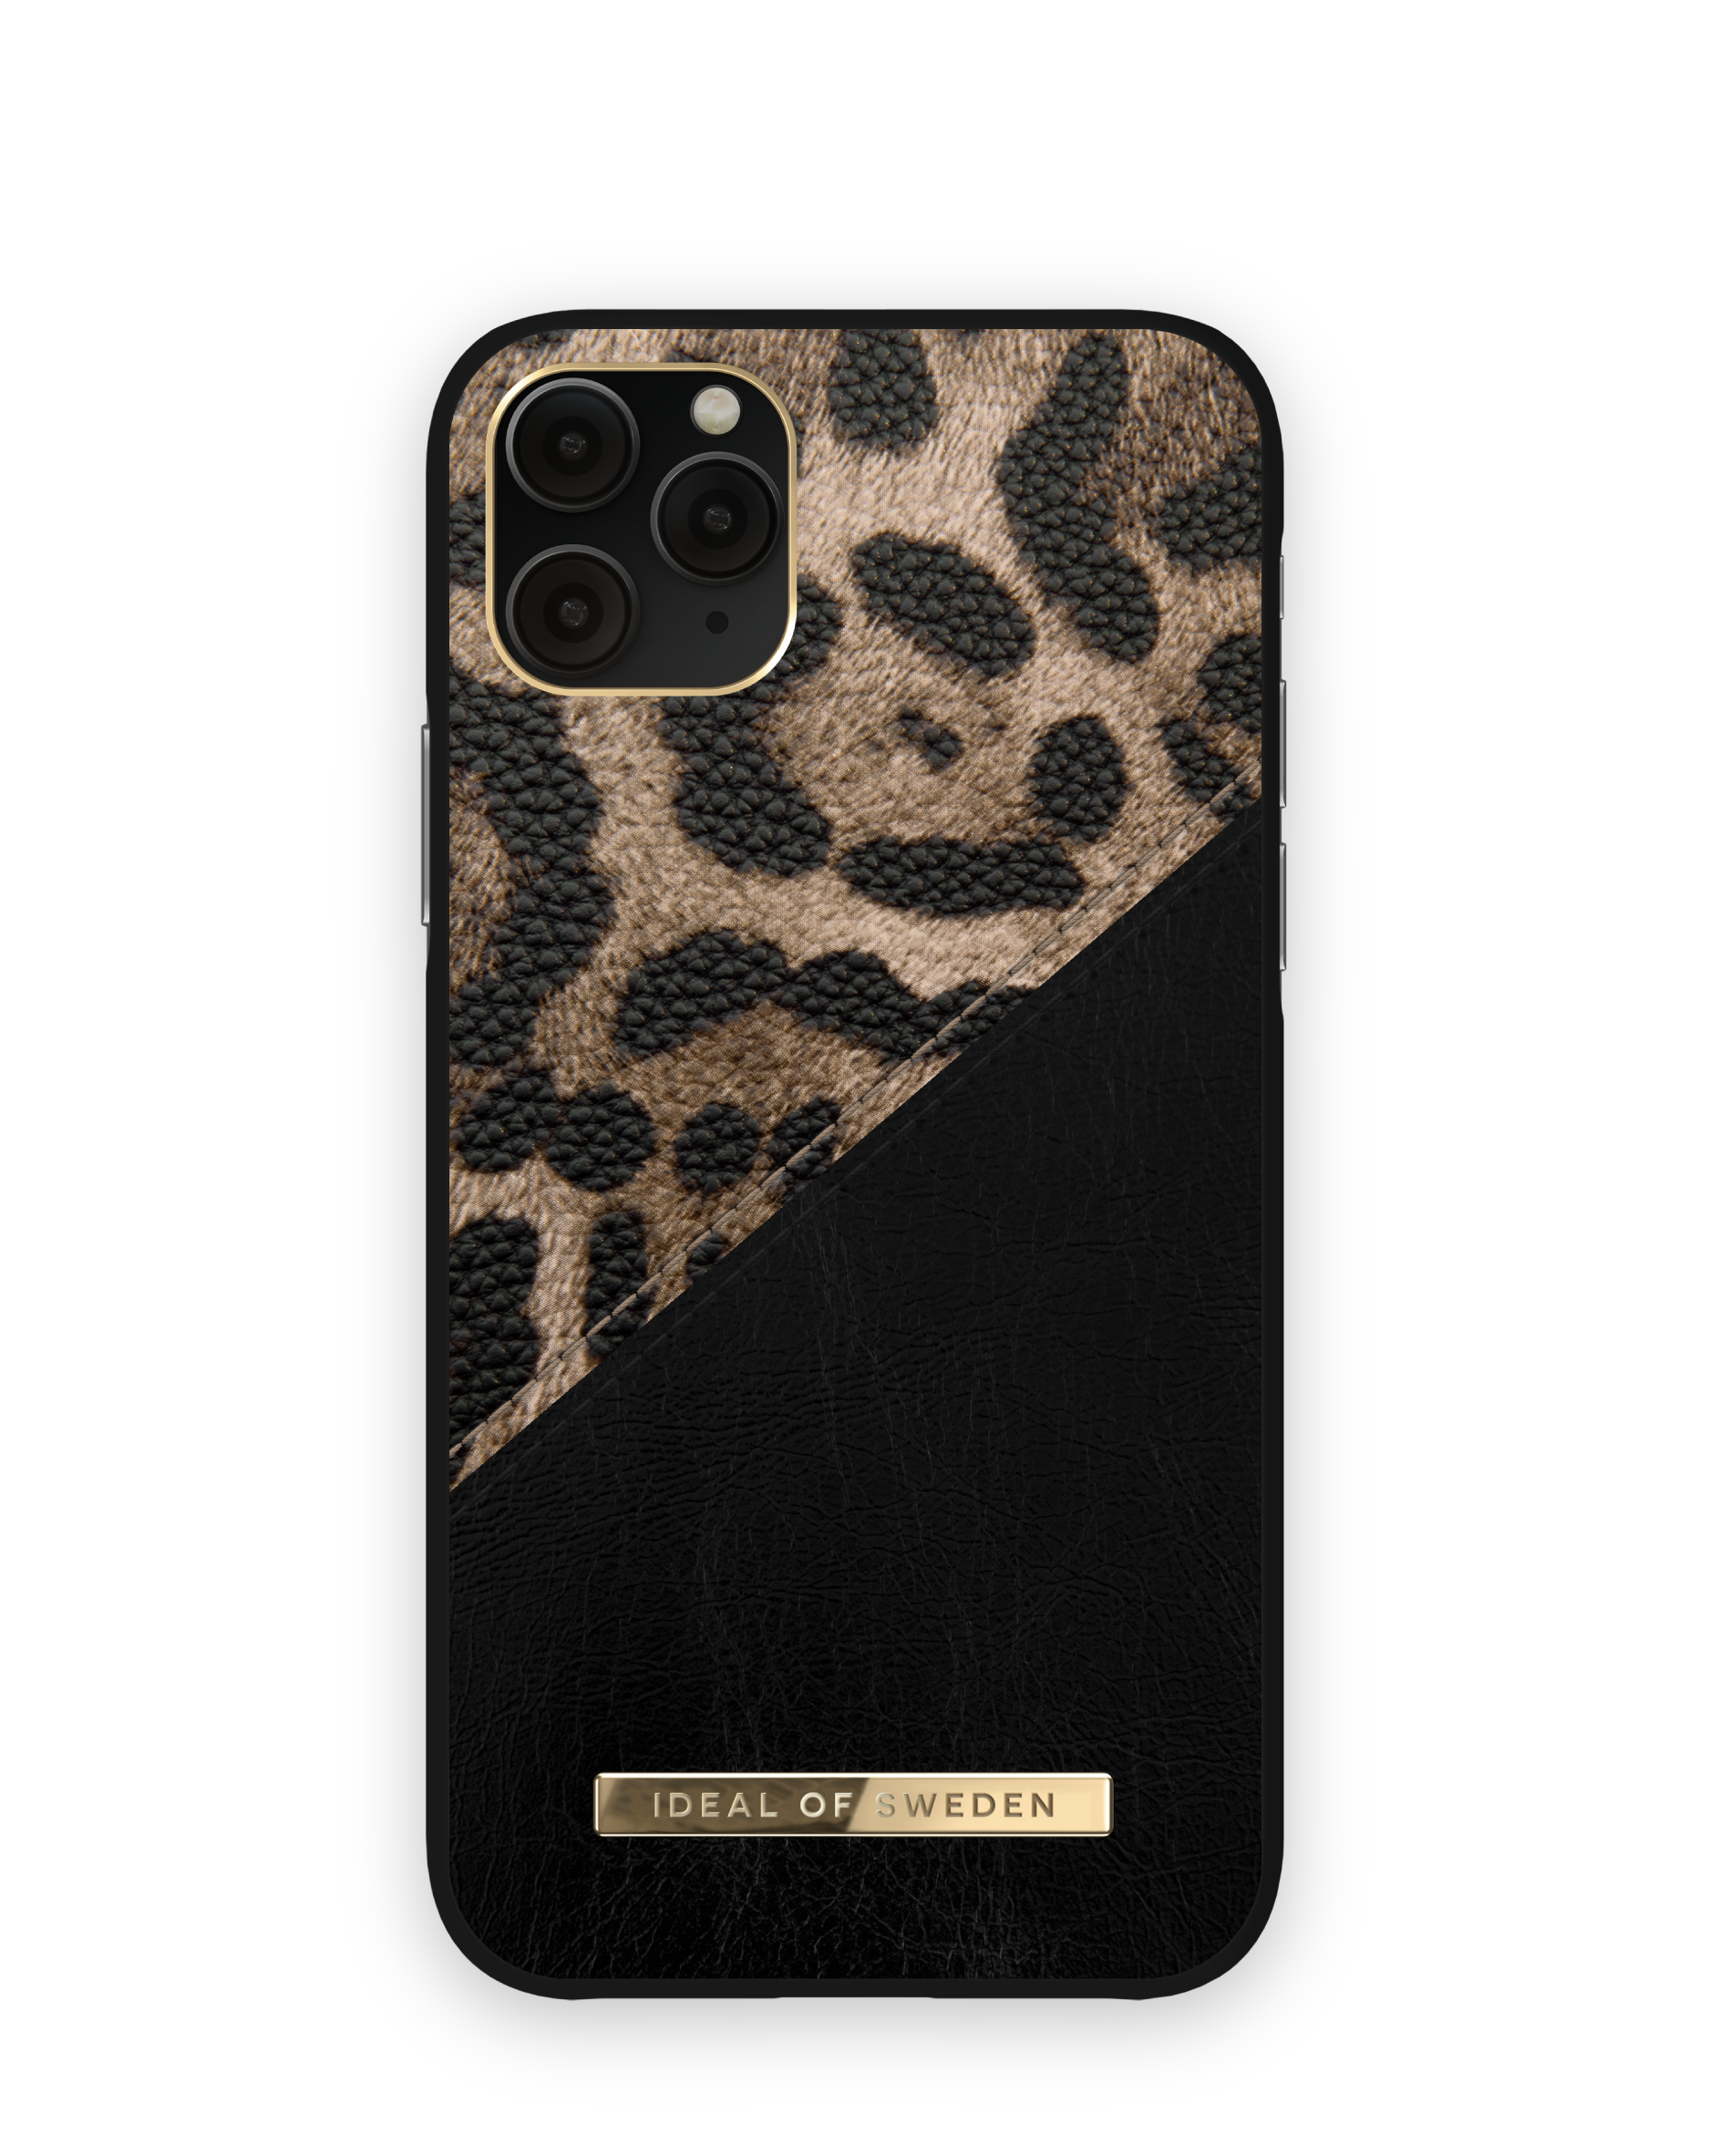 IDEAL OF 11 IDACAW21-I1958-330, iPhone Leopard Pro/XS/X, Apple, Backcover, SWEDEN Midnight